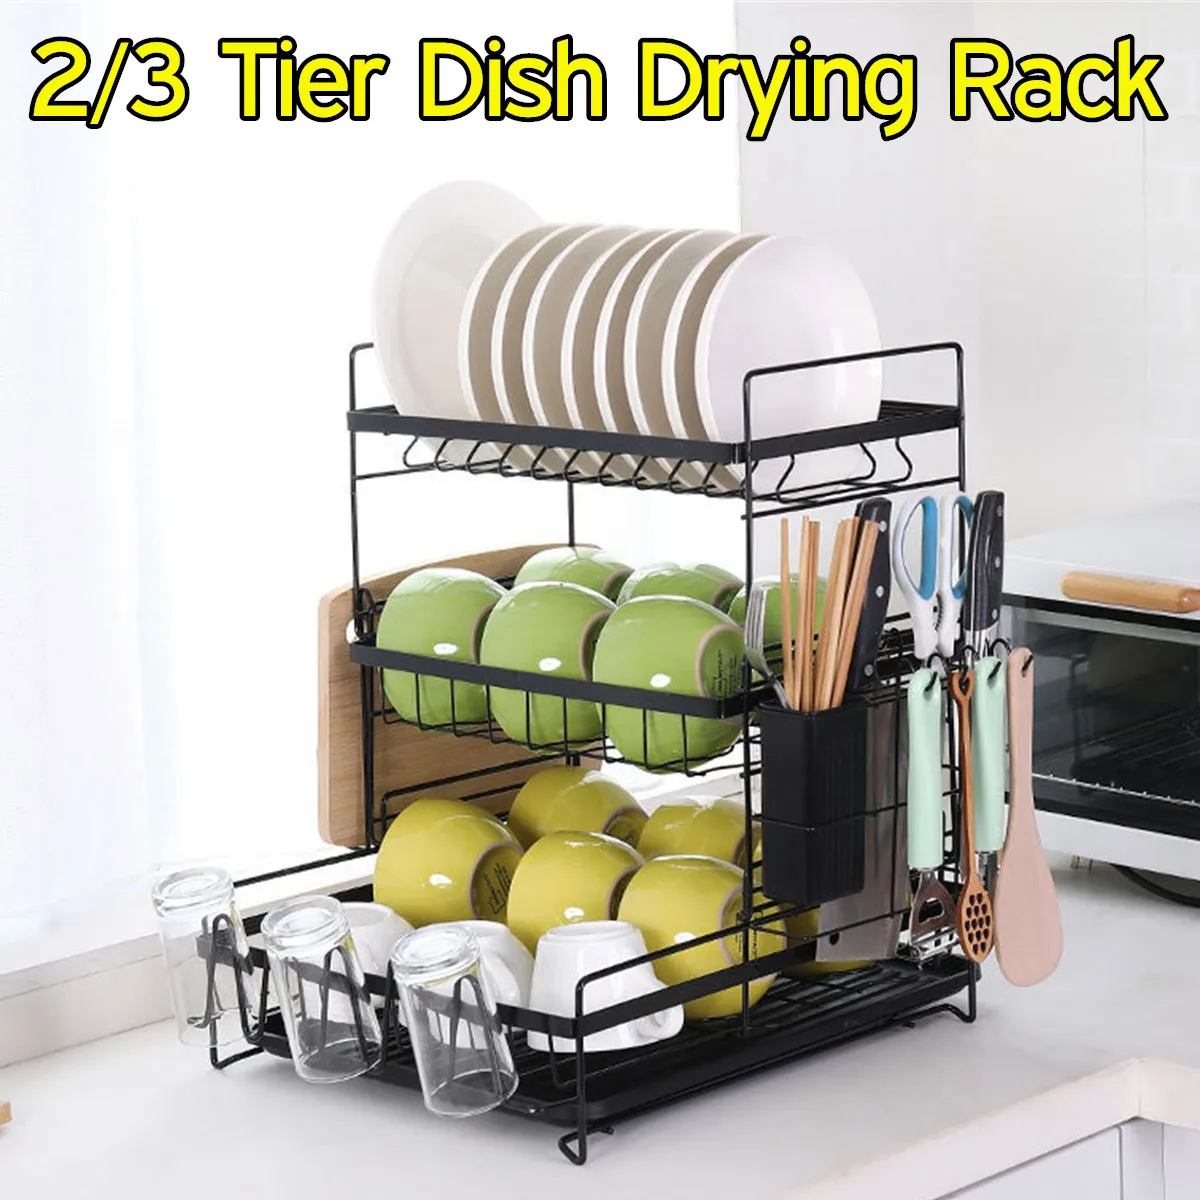 

2/3 Tiers Stainless Steel Dish Drying Rack with Drainboard Countertop Utensil Holder Kitchen Counter Drainer Cutlery Shelves